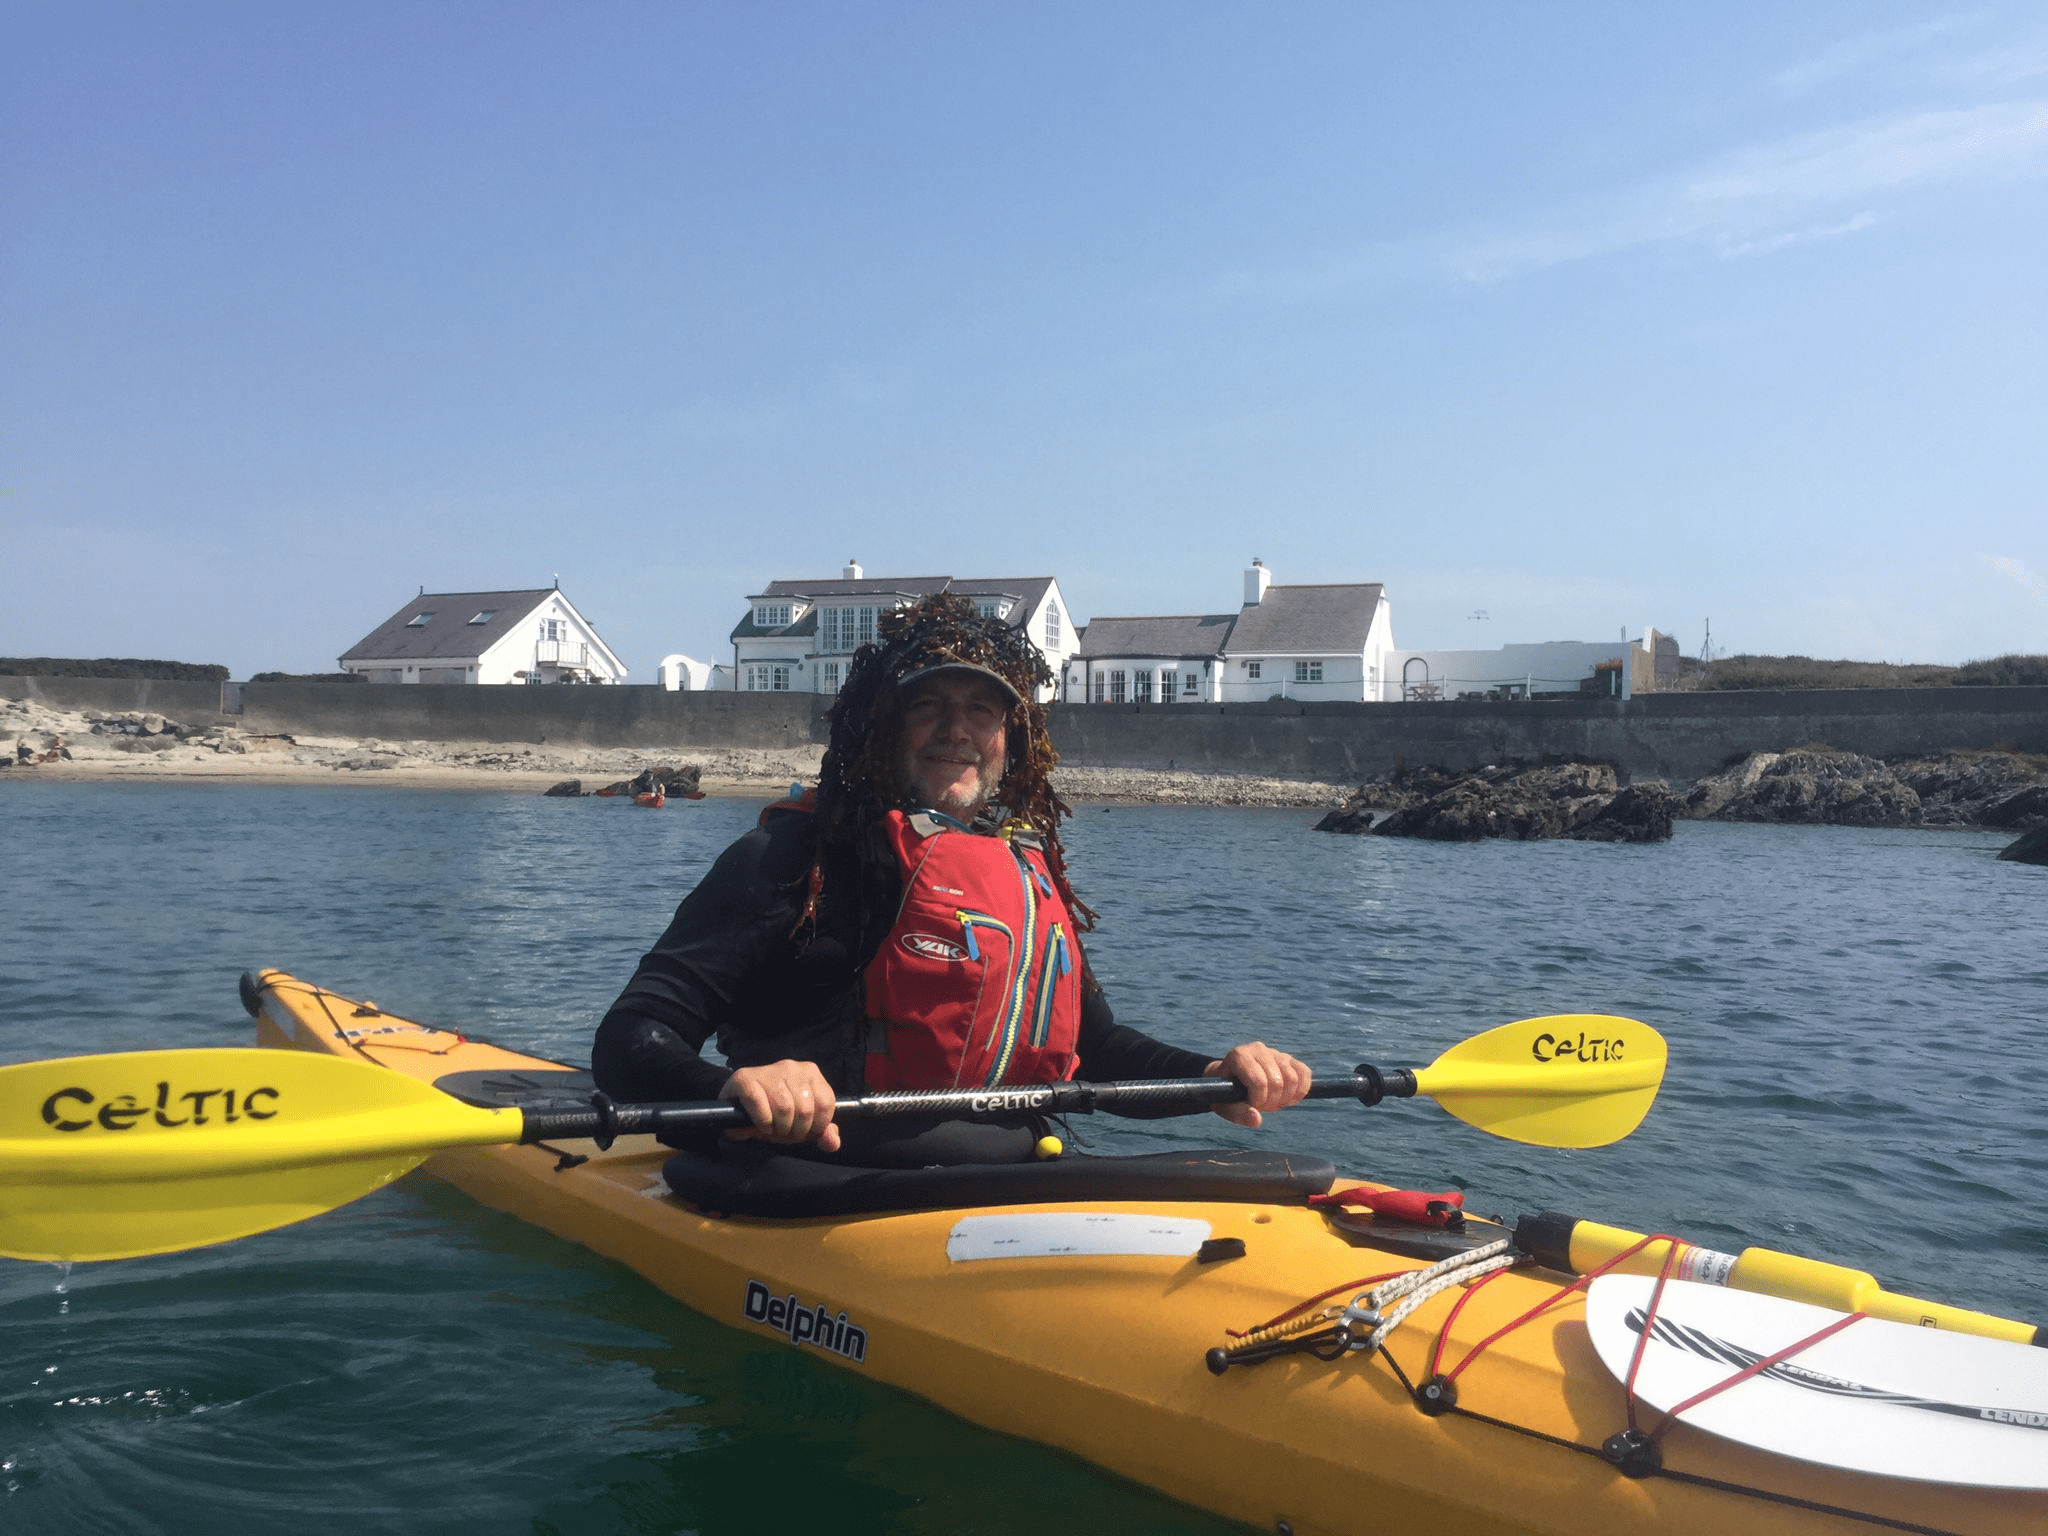 A person in a yellow kayak

Description automatically generated with medium confidence